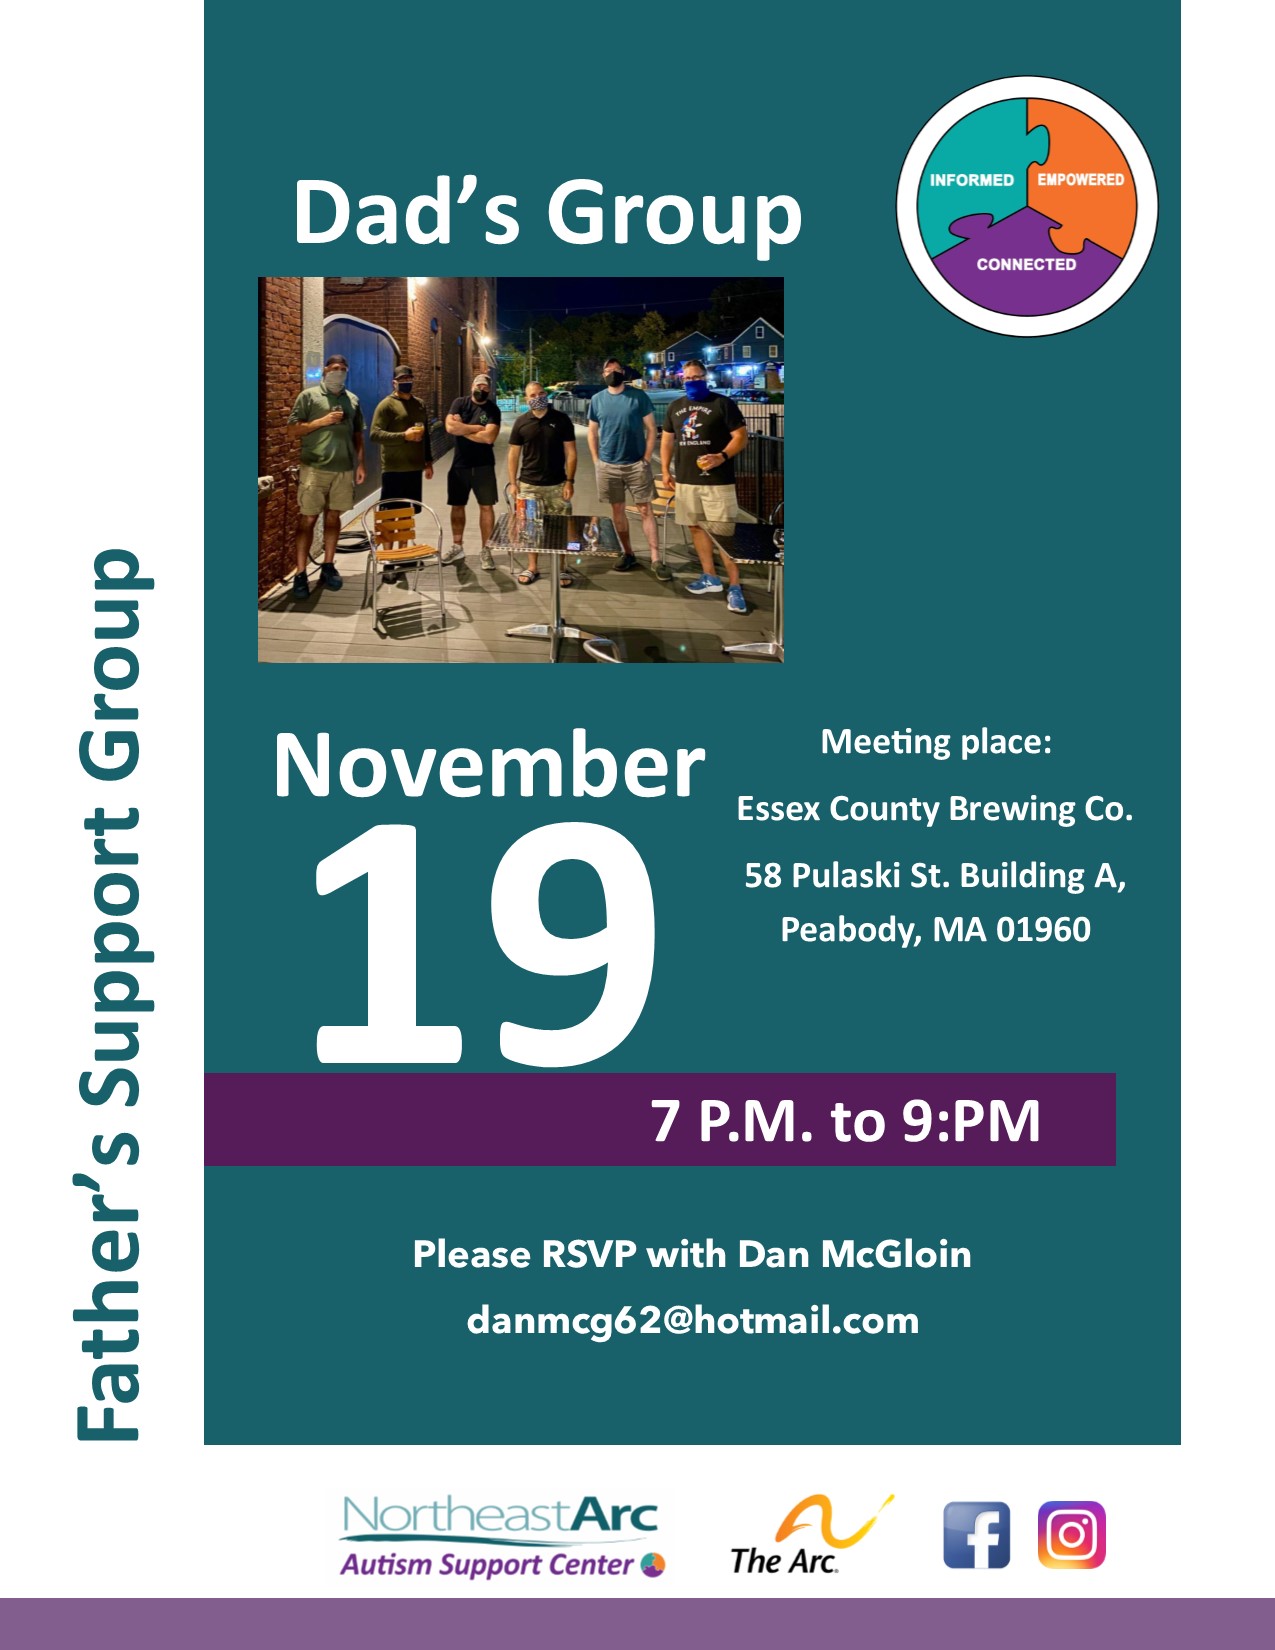 Father's Support Group. RSVP at danmcg62@hotmail.com; Nov 19 at 7pm